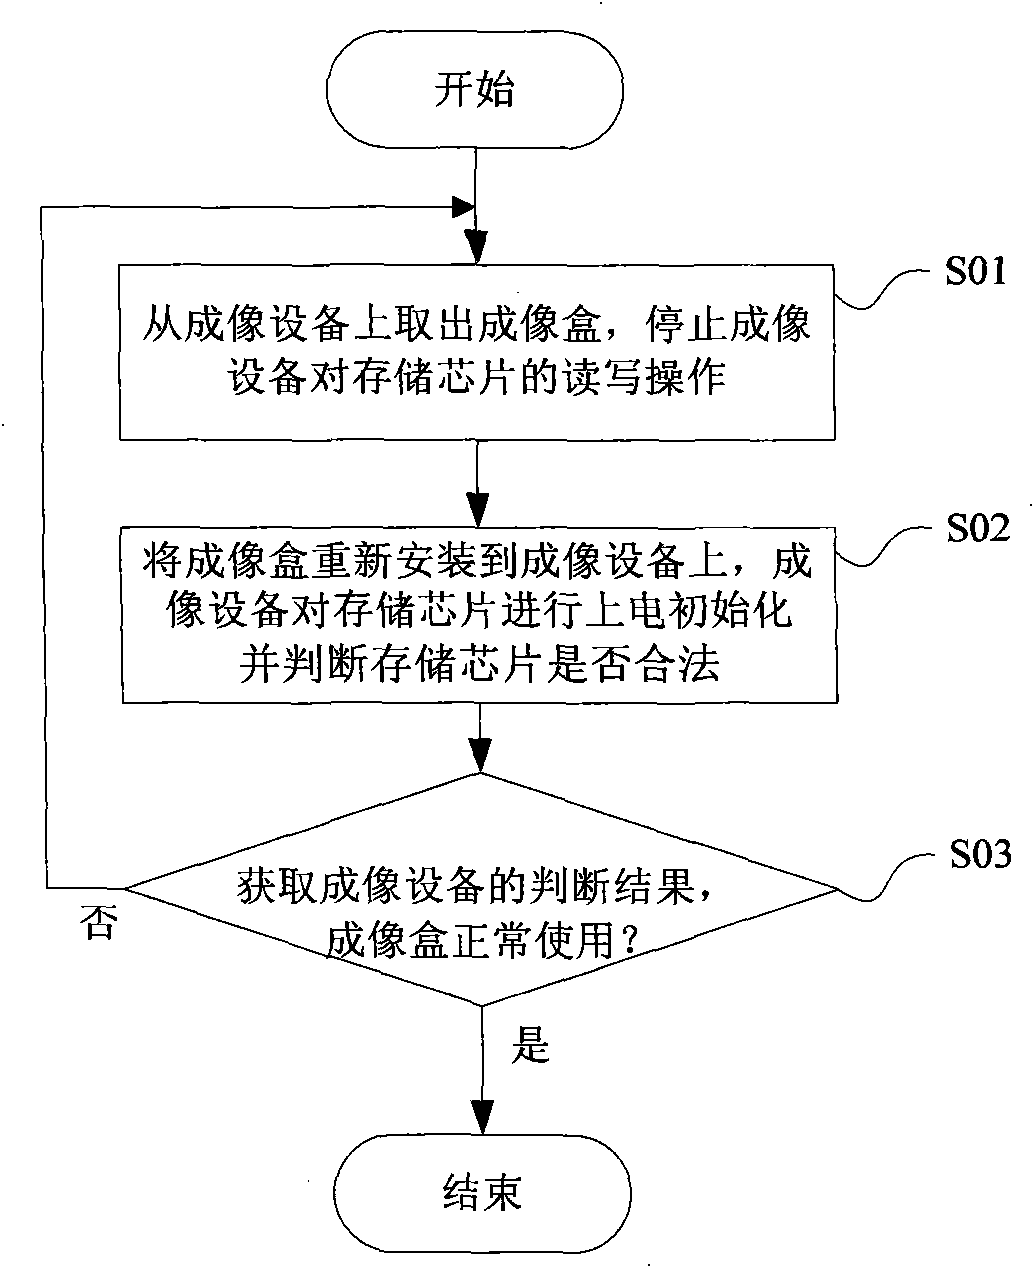 Memory chip, imaging box, serial number replacement method and method for using memory chip